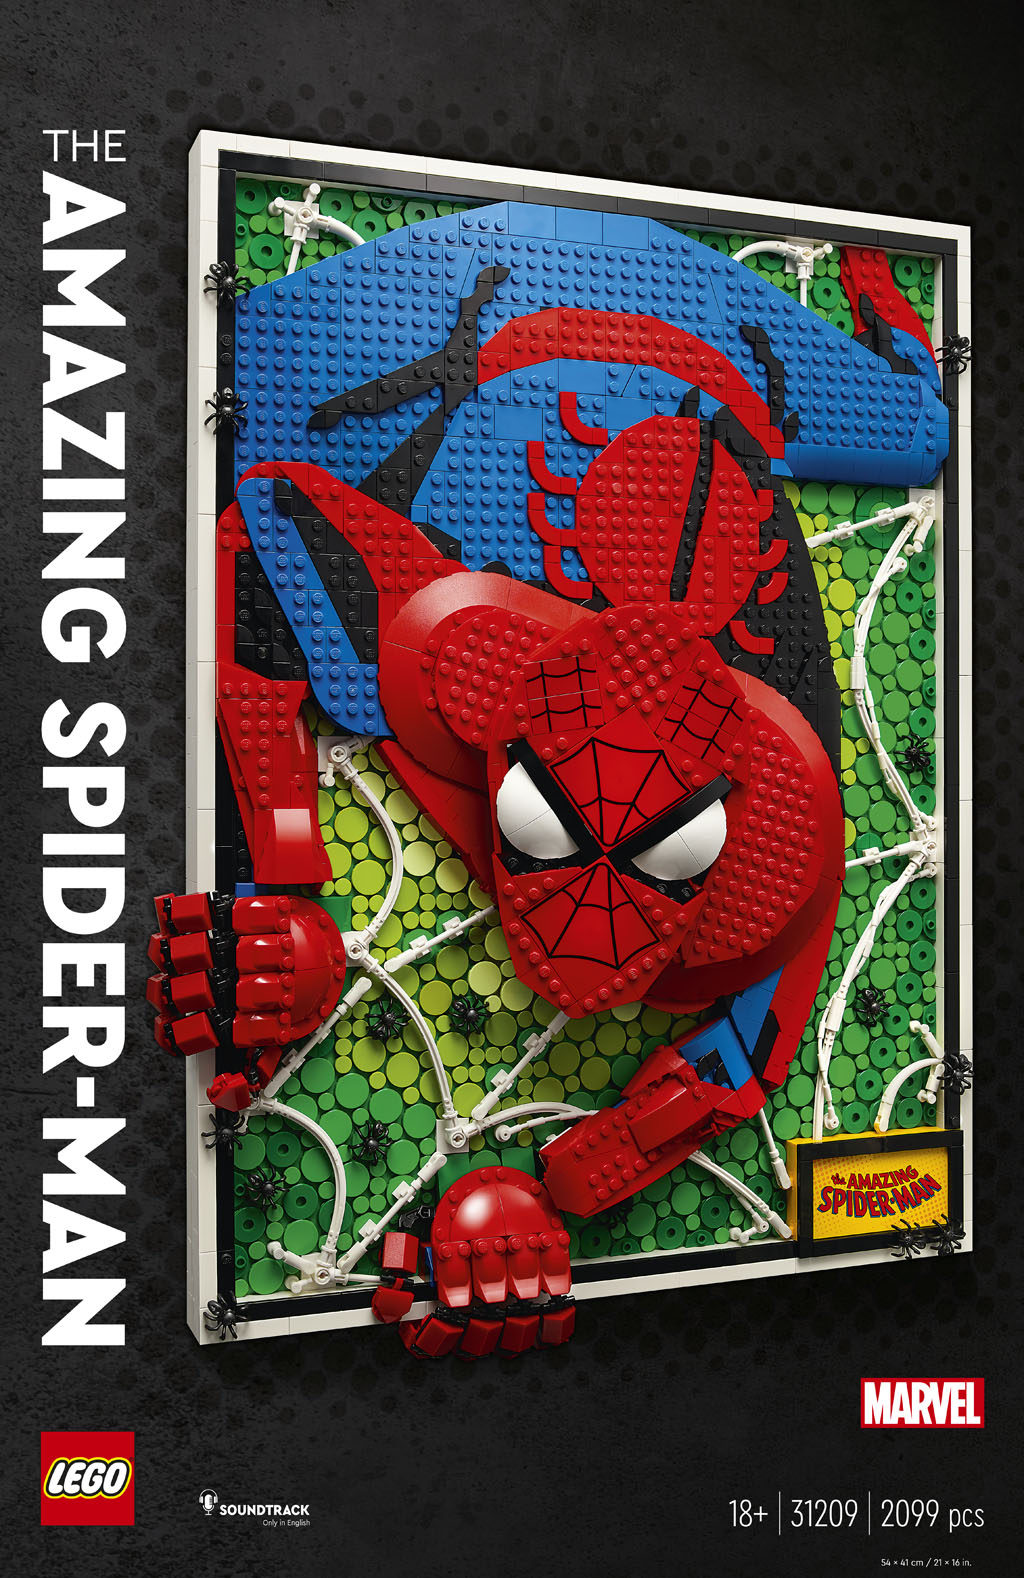 LEGO Art The Amazing Spider-Man (31209) Officially - Brick Fan